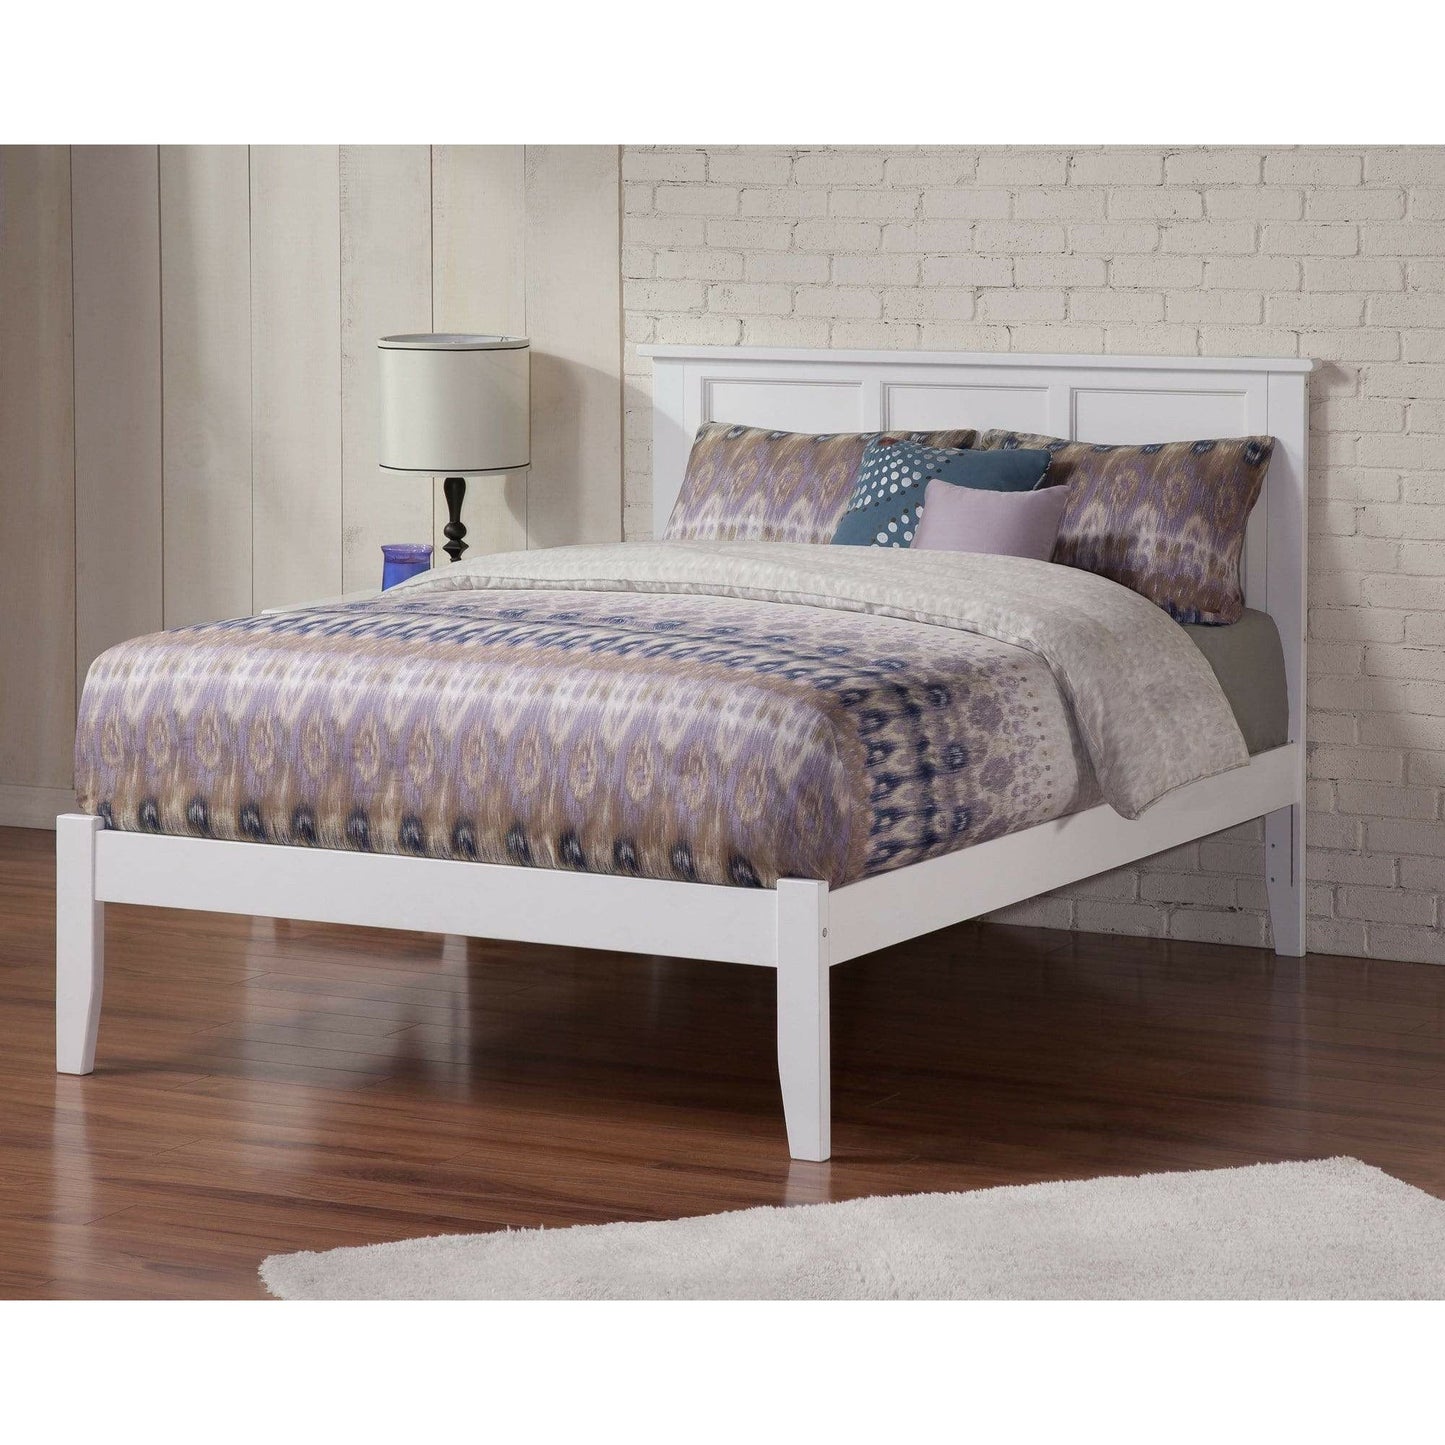 Atlantic Furniture Bed Madison King Platform Bed with Open Foot Board in Espresso